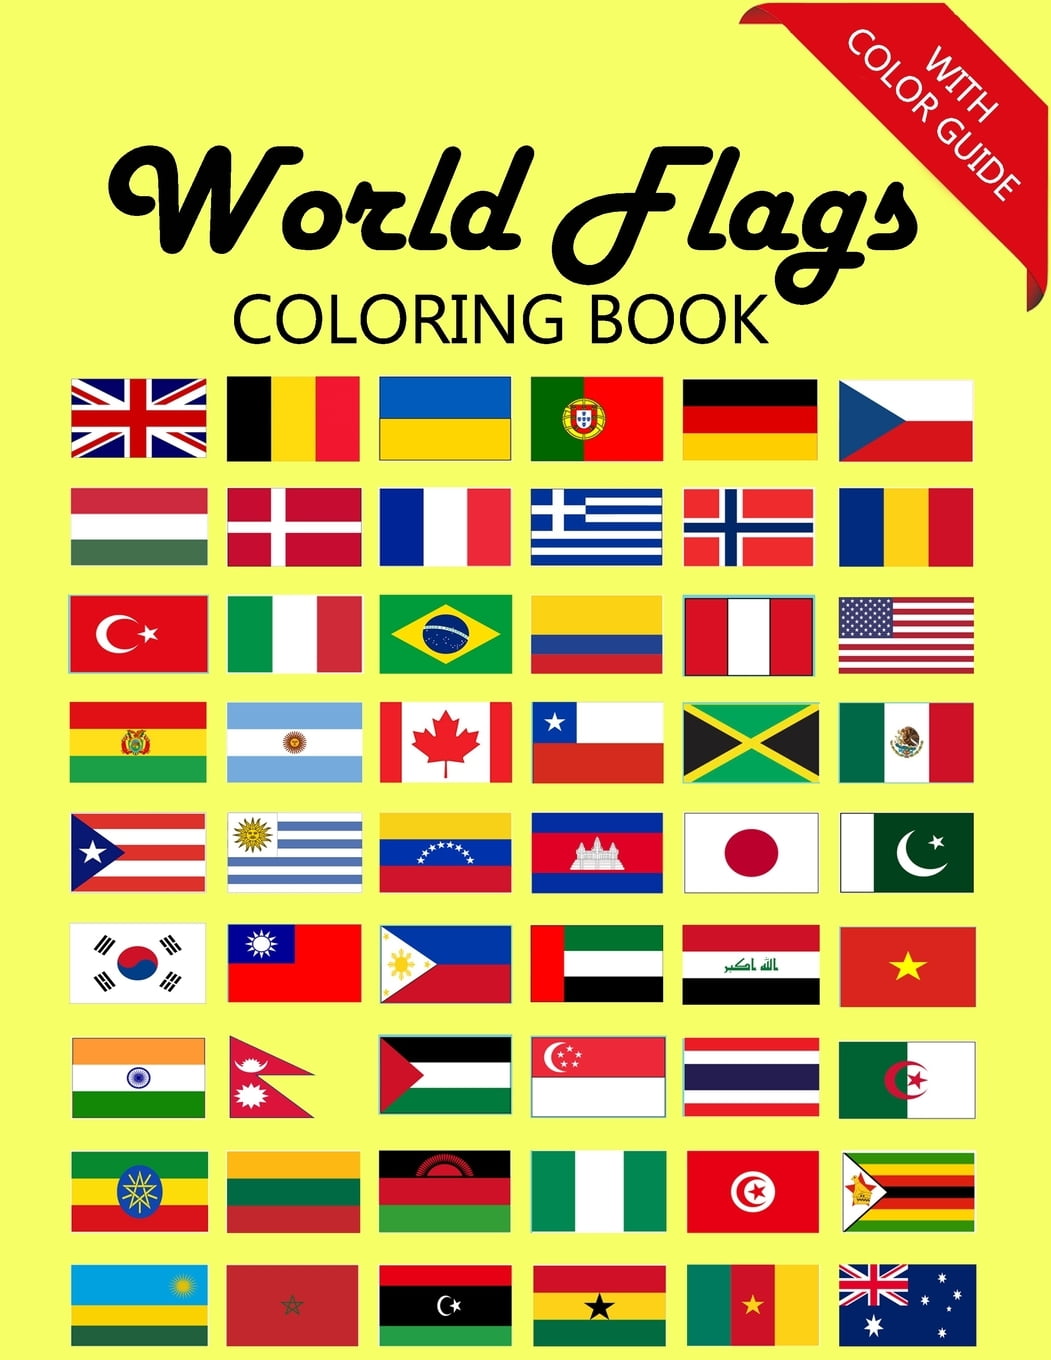 World Flags Coloring Book Awesome book for kids to learn